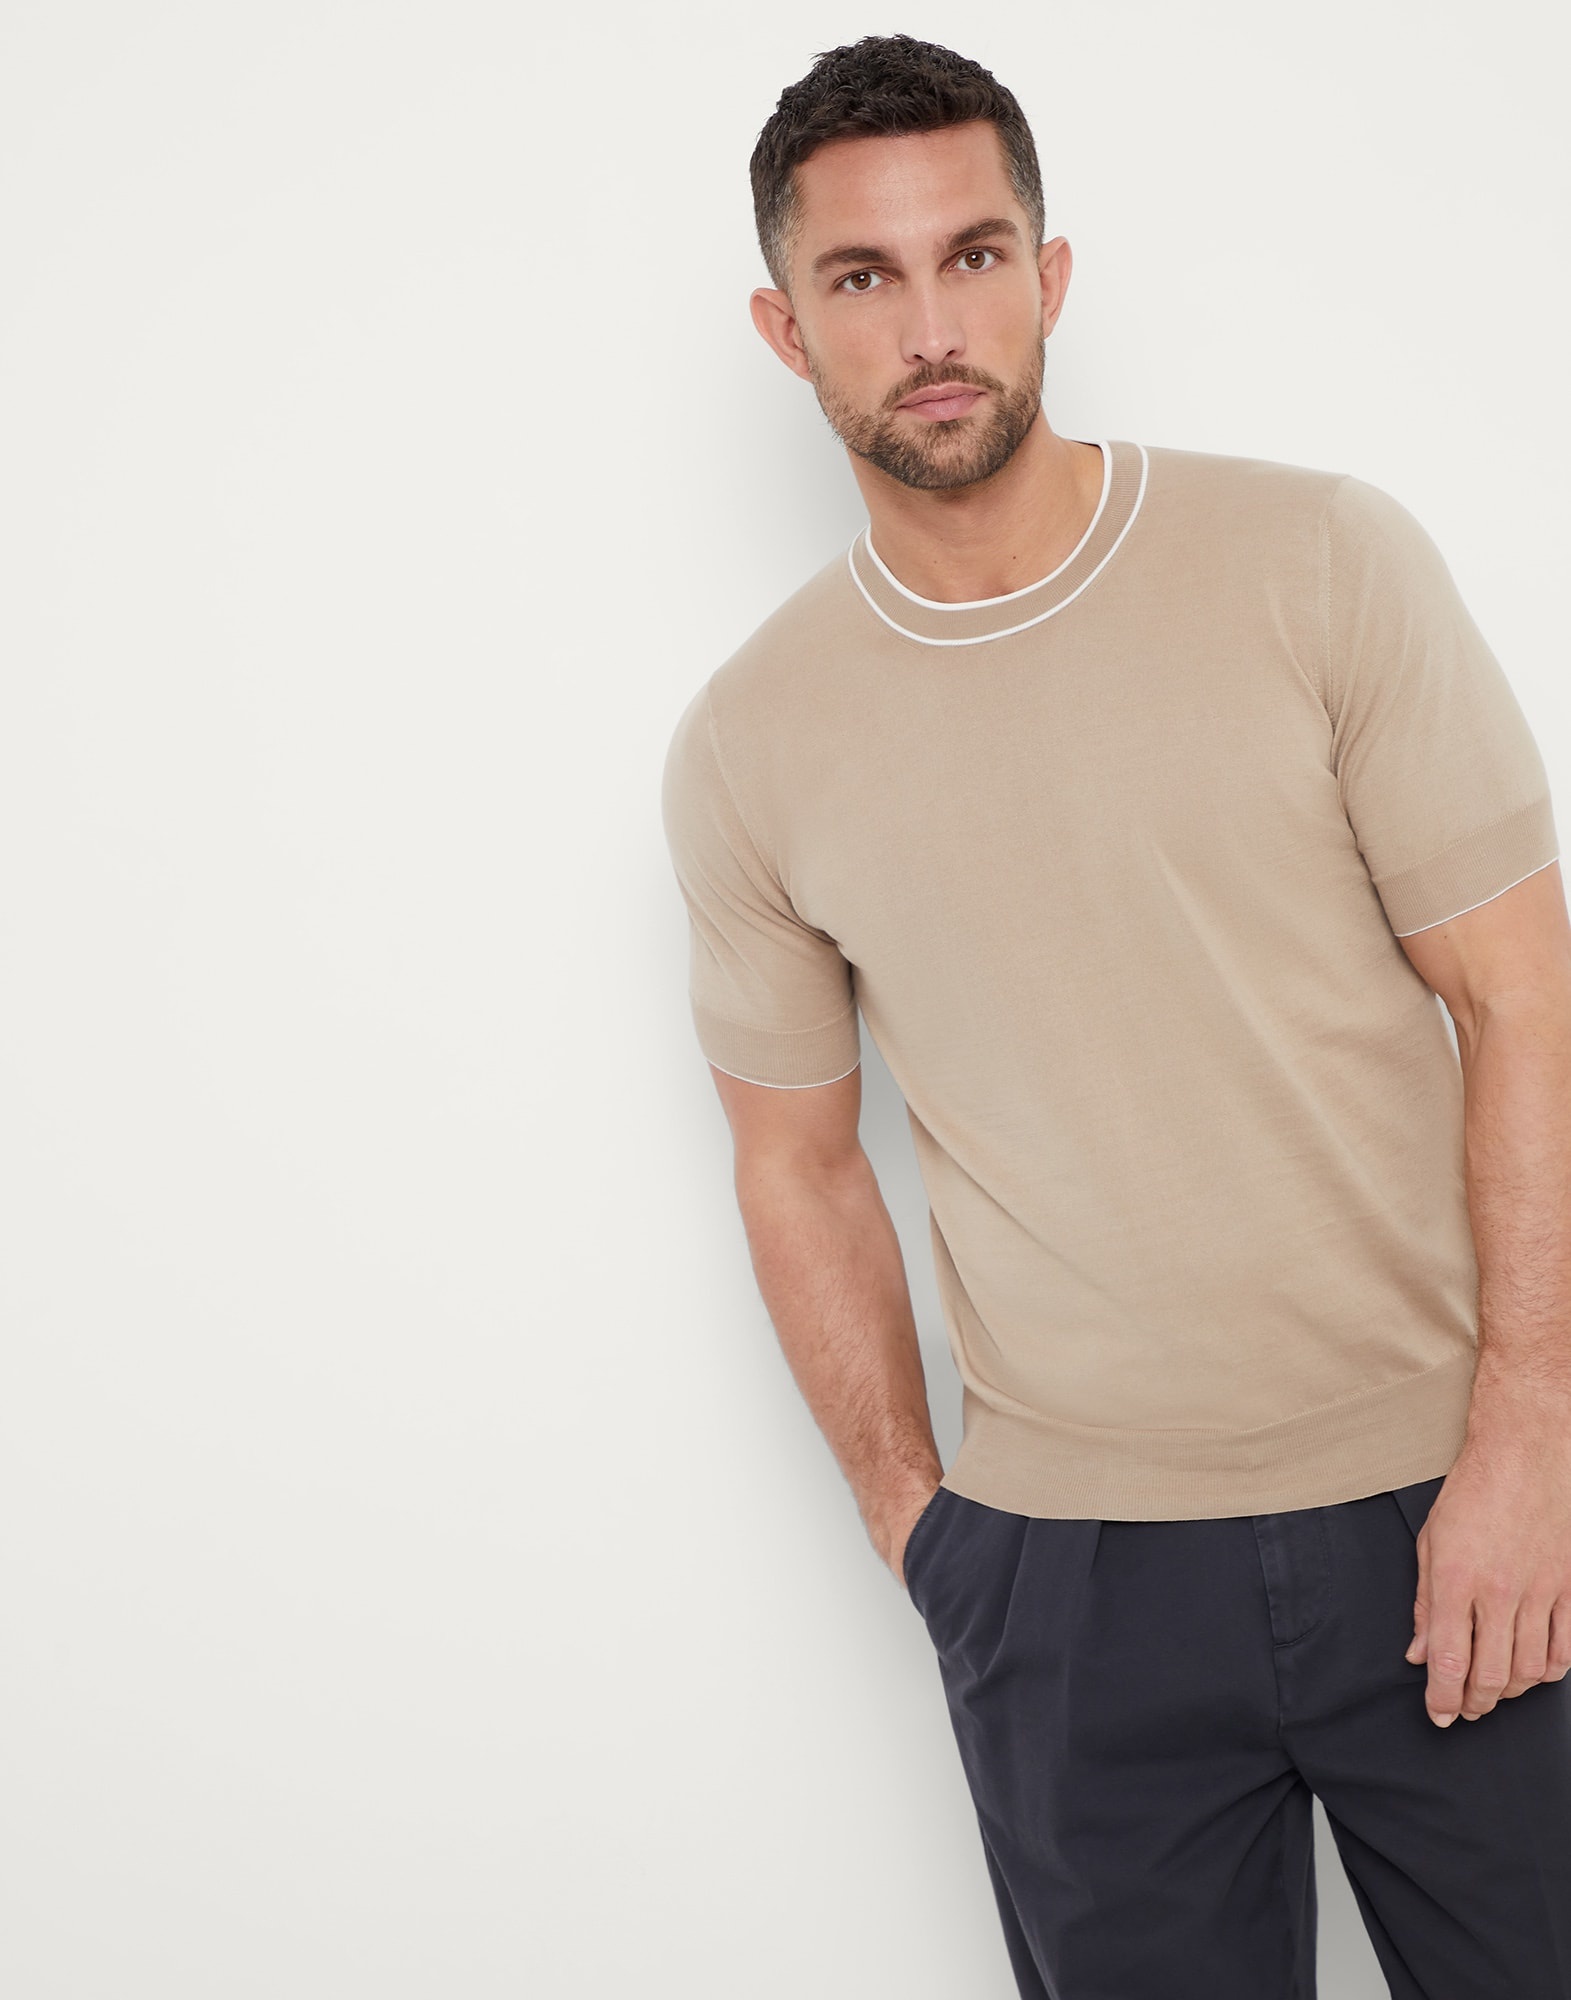 Cotton lightweight knit T-shirt with contrast details - 1